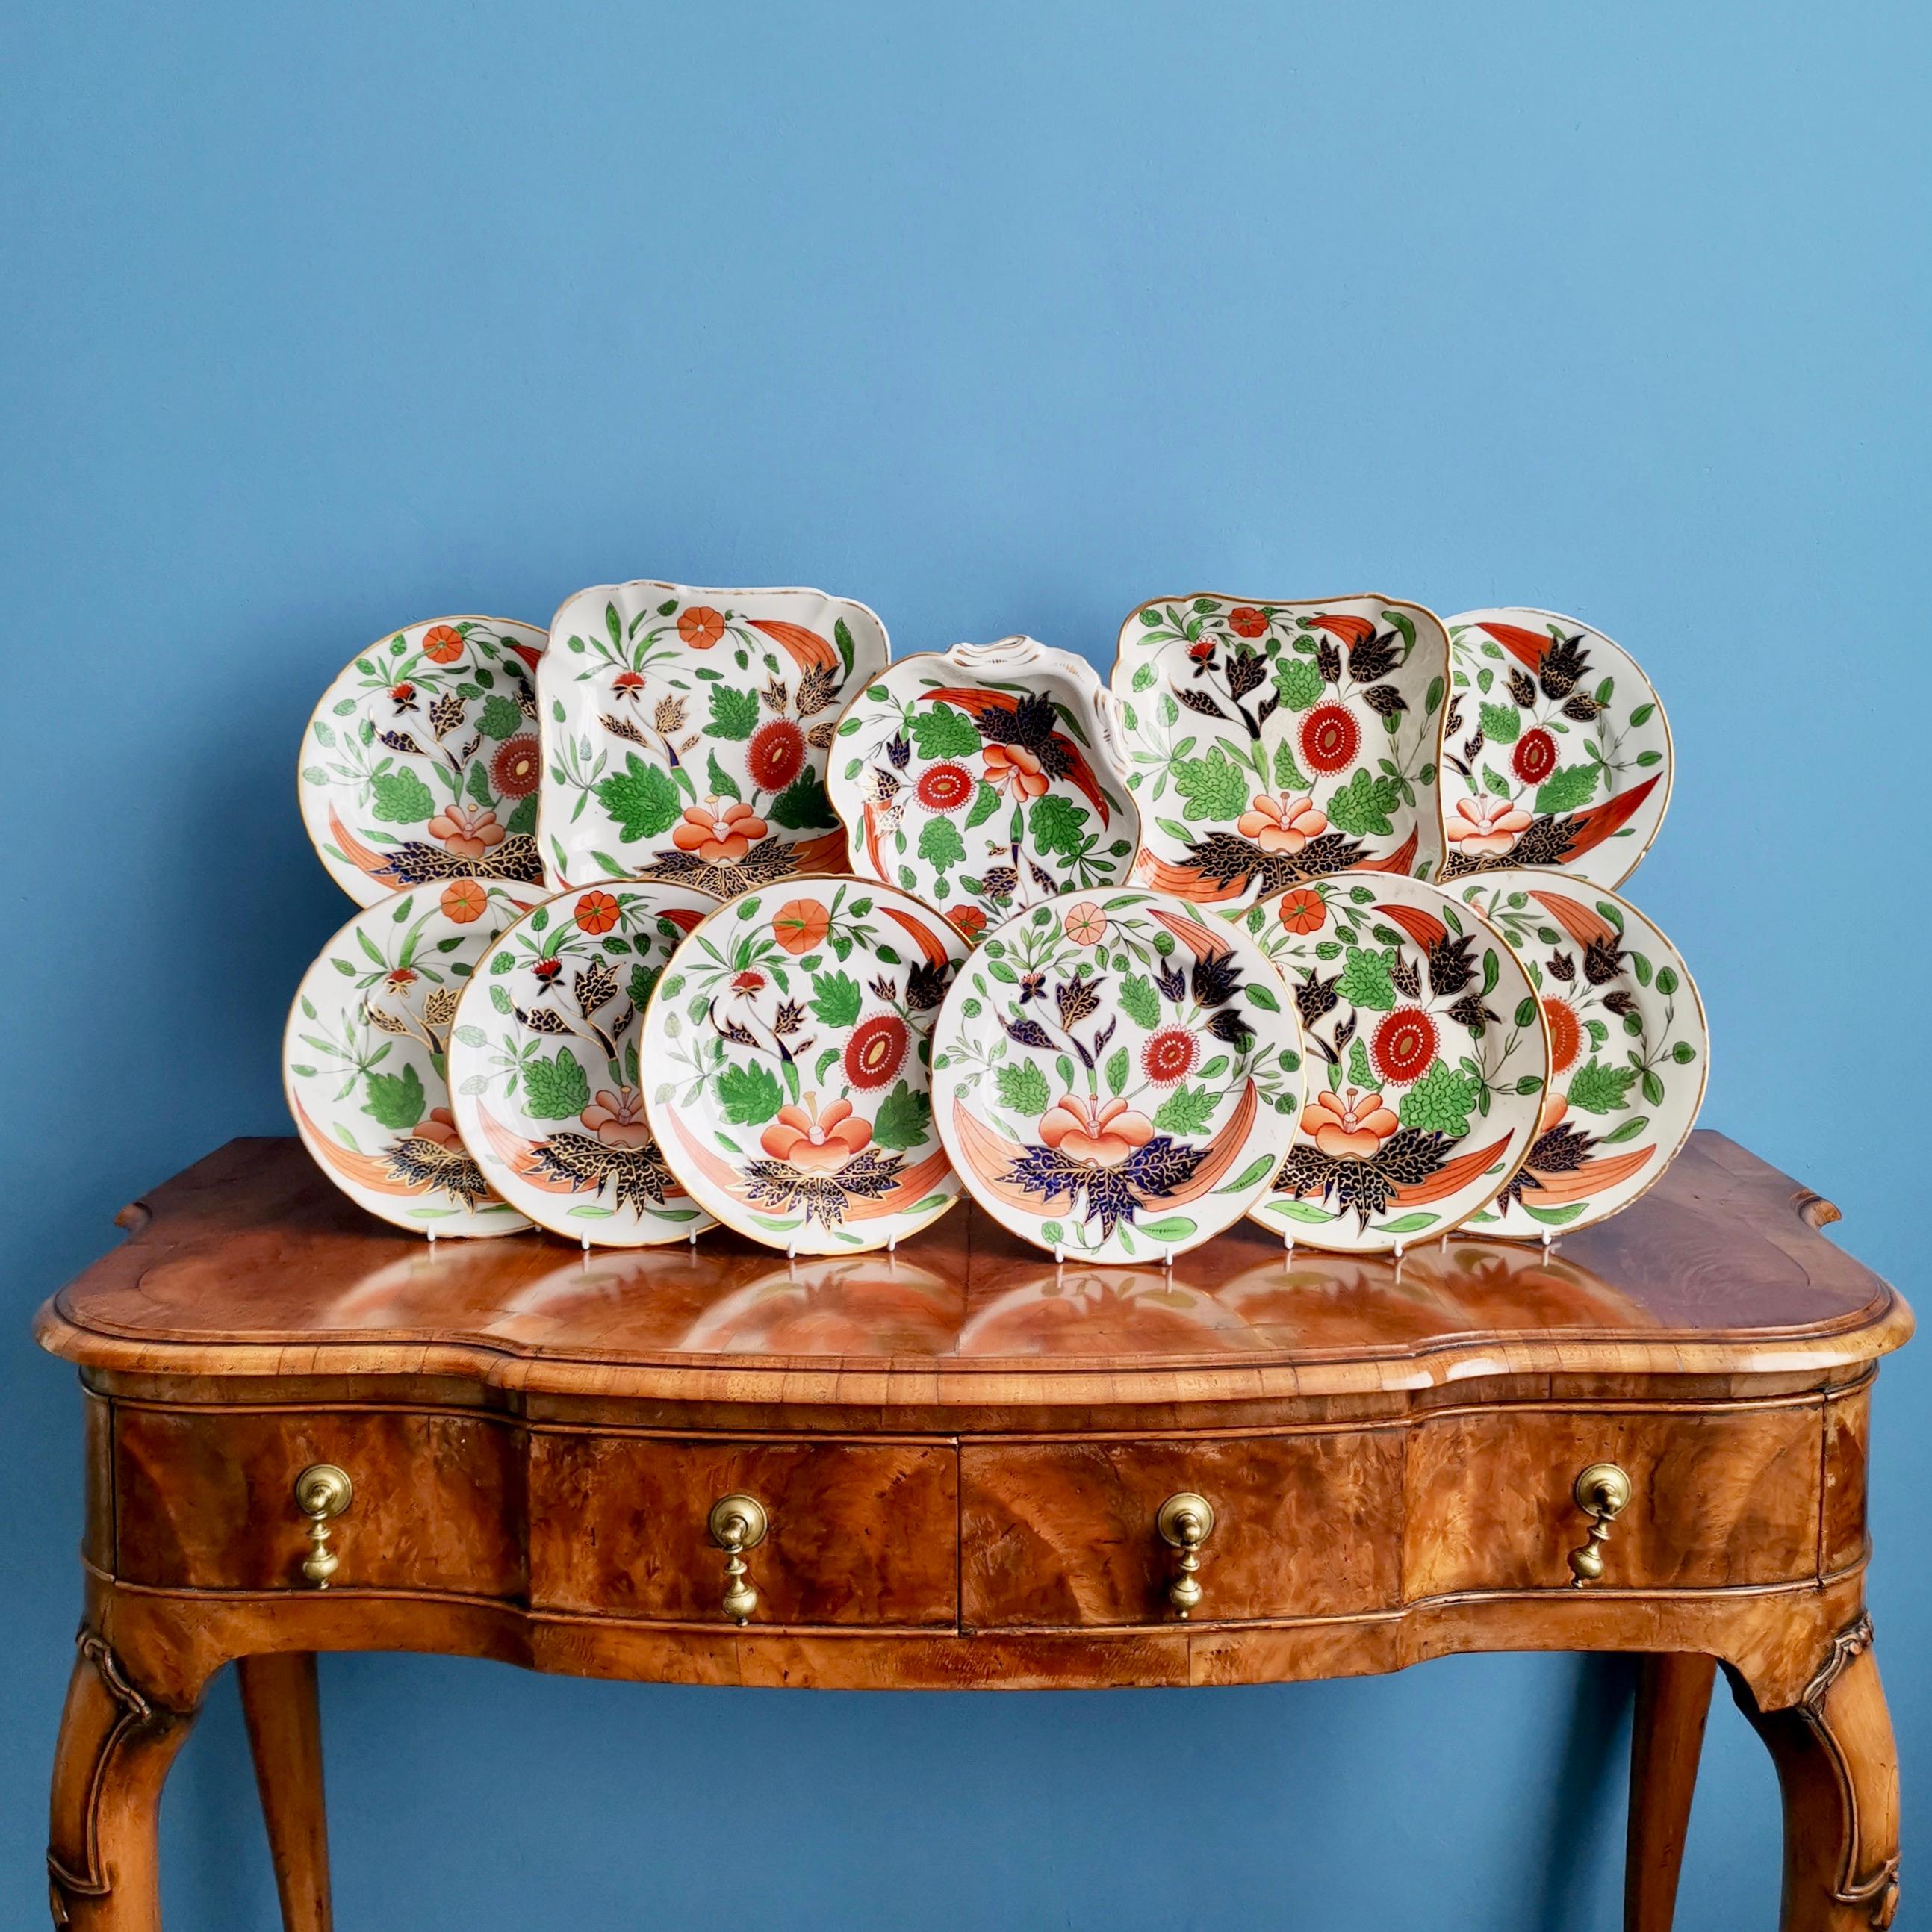 This is a very boldly decorated John Rose / Coalport dessert service made in about 1805, which is known as the Georgian period. The service is decorated in a very bold Imari pattern and consists of eight plates, two square dishes and one shell